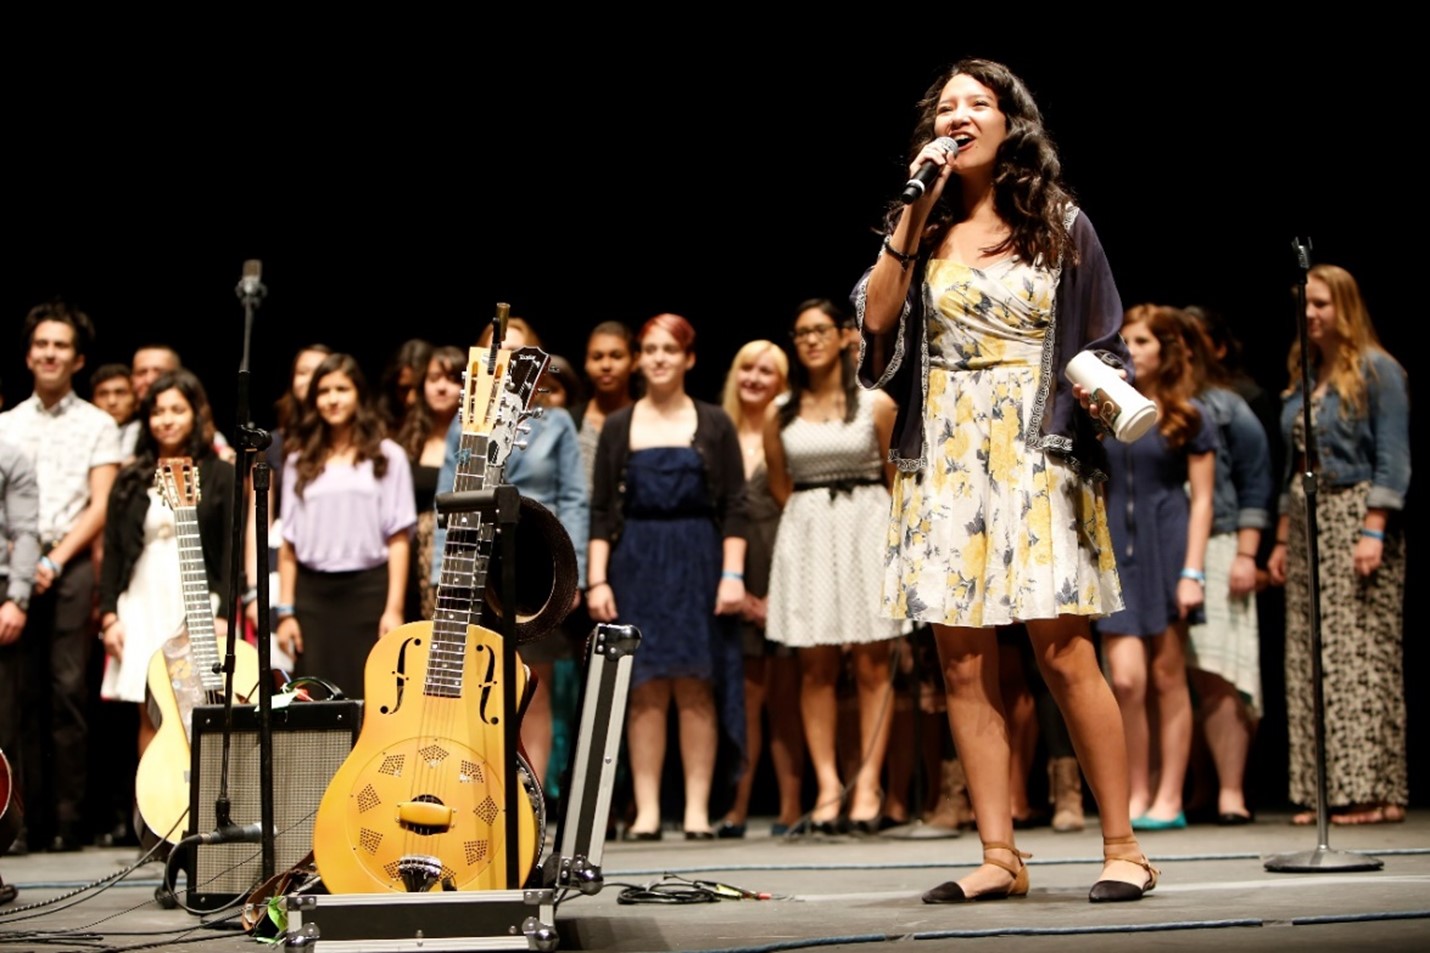 student on stage with microphone appears to be singing. There is a group of students behind her on the stage and two acoustic guitars to the left of the student.